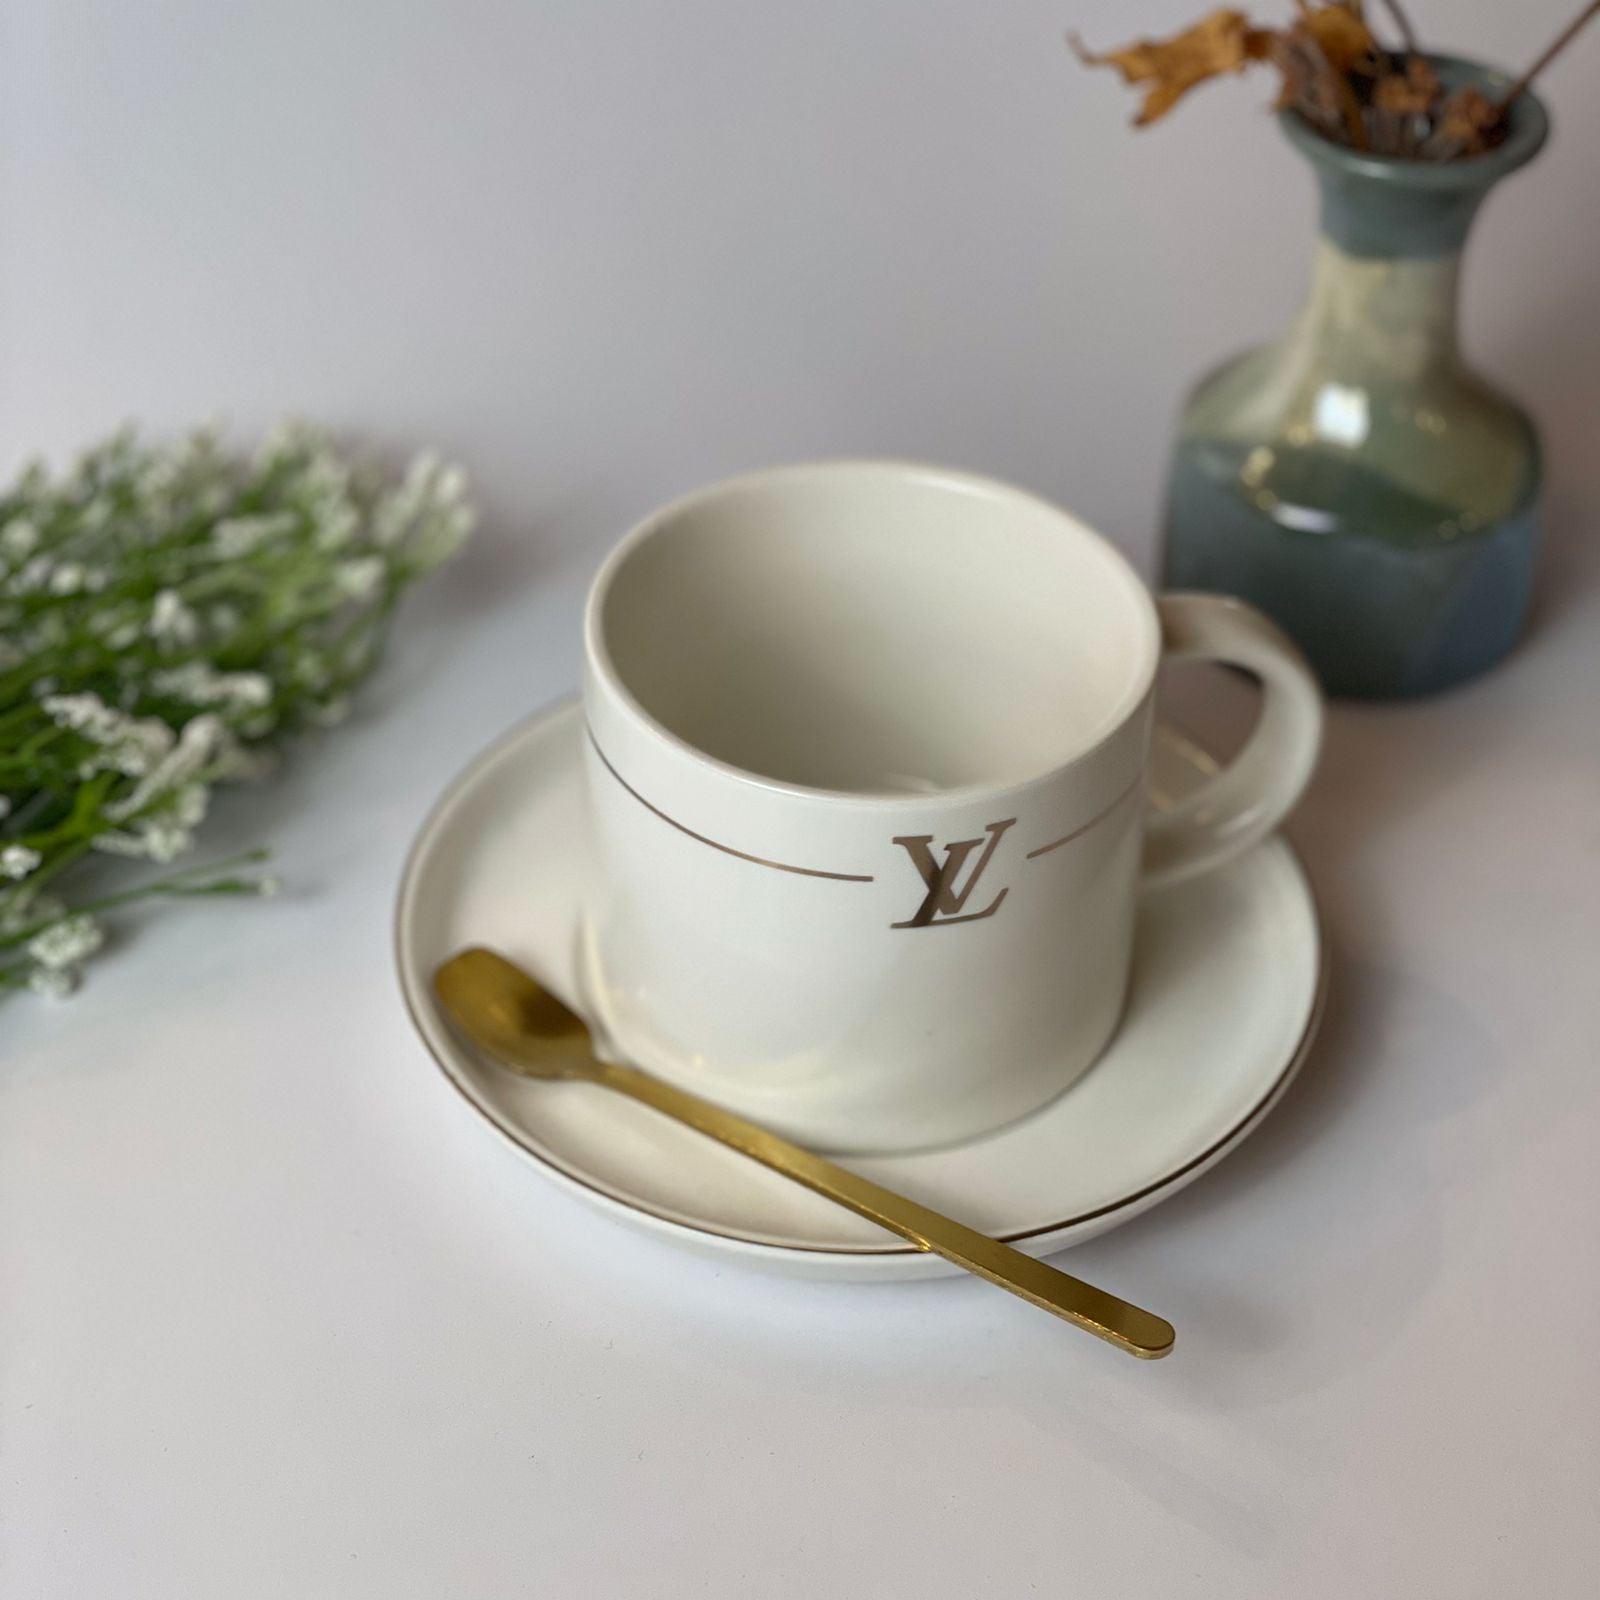 Buy Louis Vuitton Cups Online In India -  India